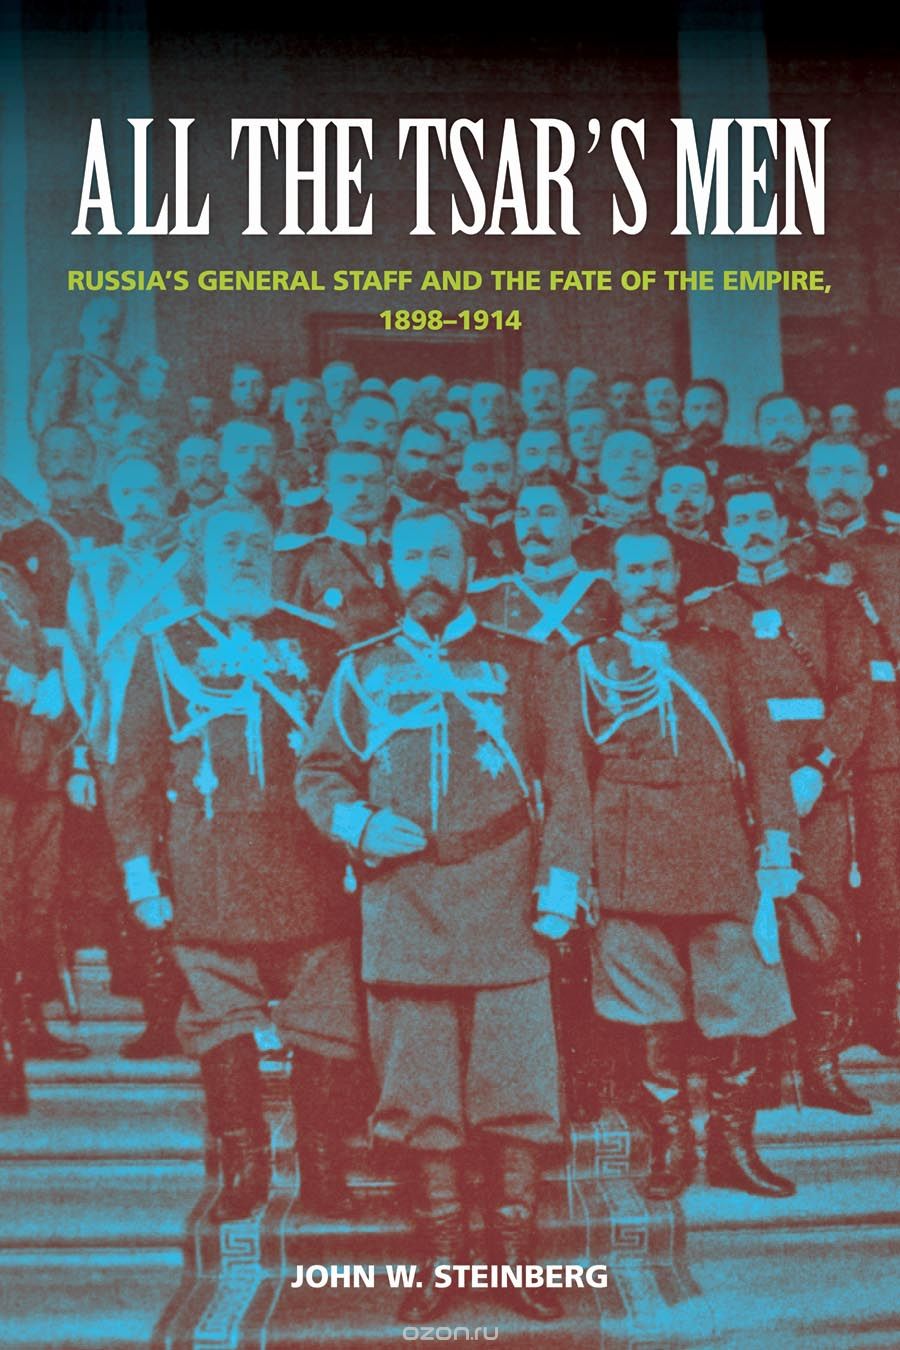 Скачать книгу "All the Tsar?s Men – Russia?s General Staff and the Fate of the Empire, 1898–1914"